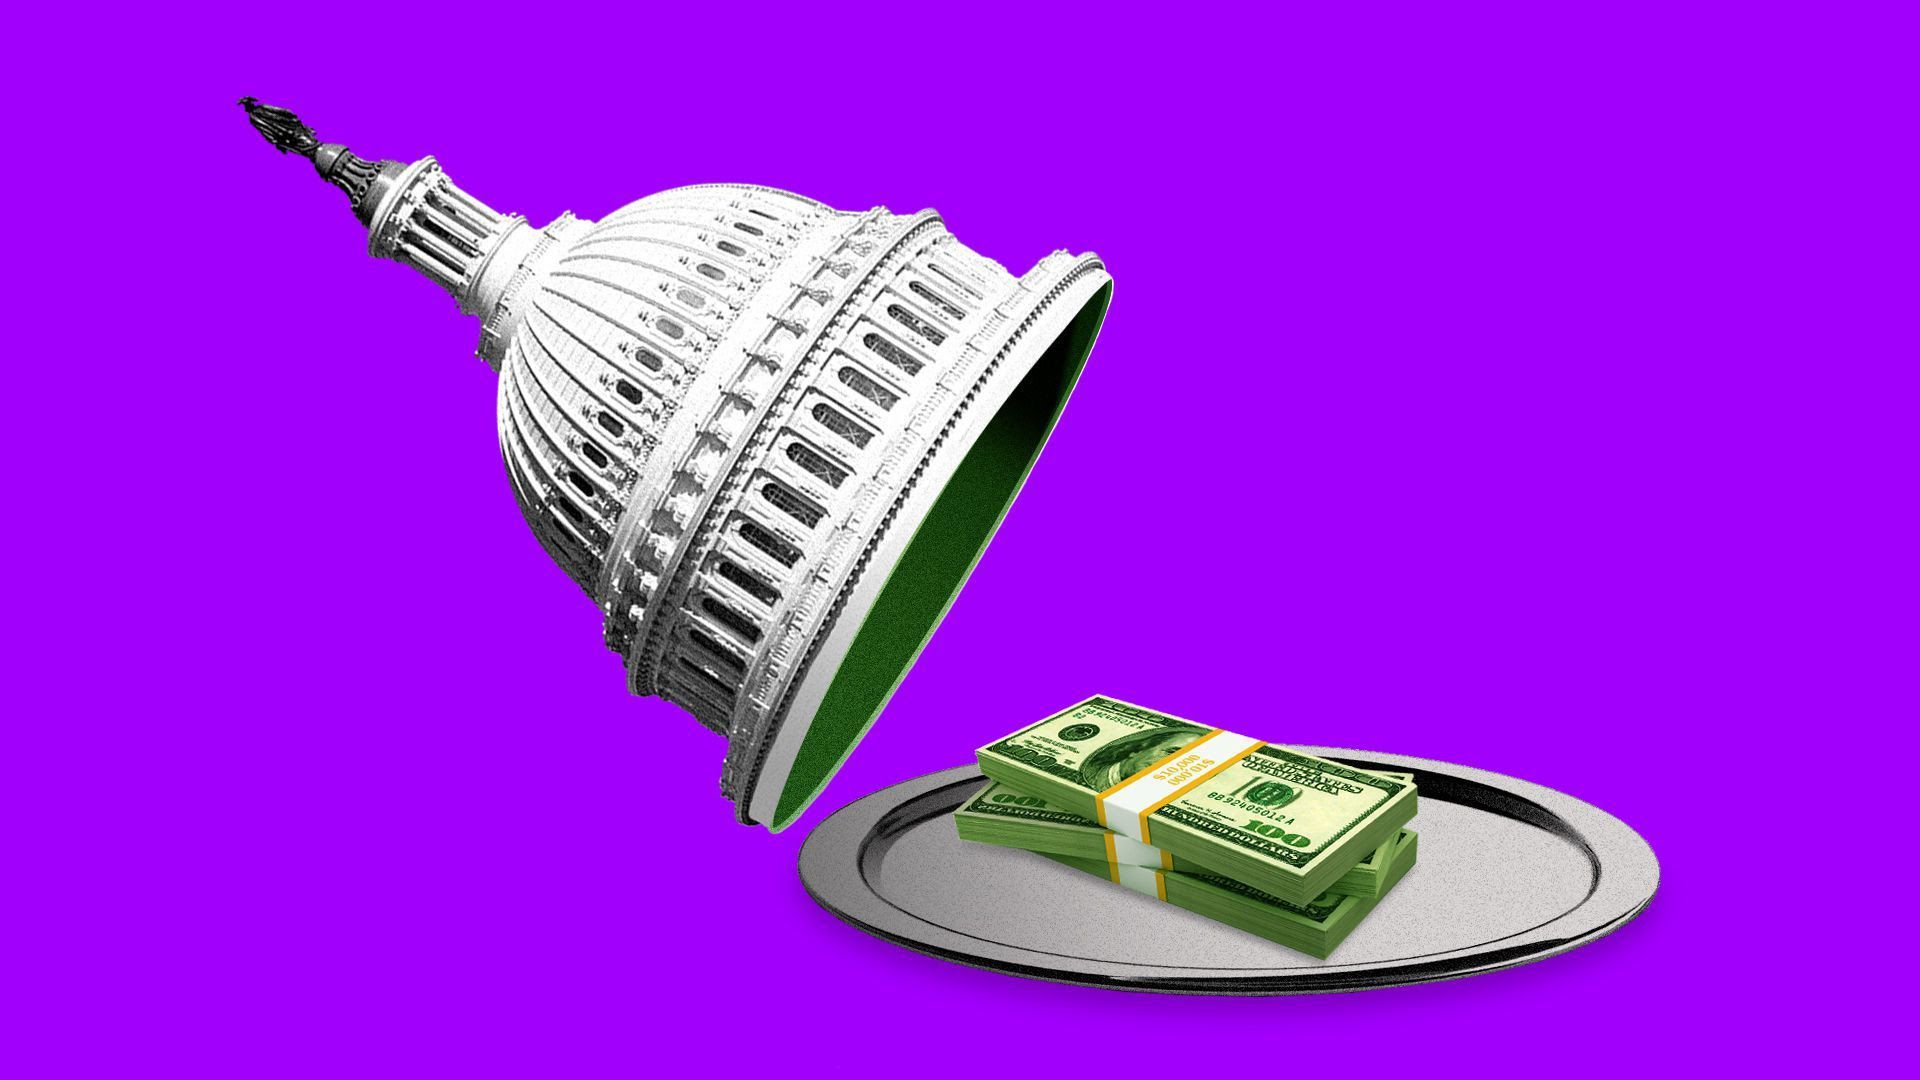 Illustration of congressional money on a plate